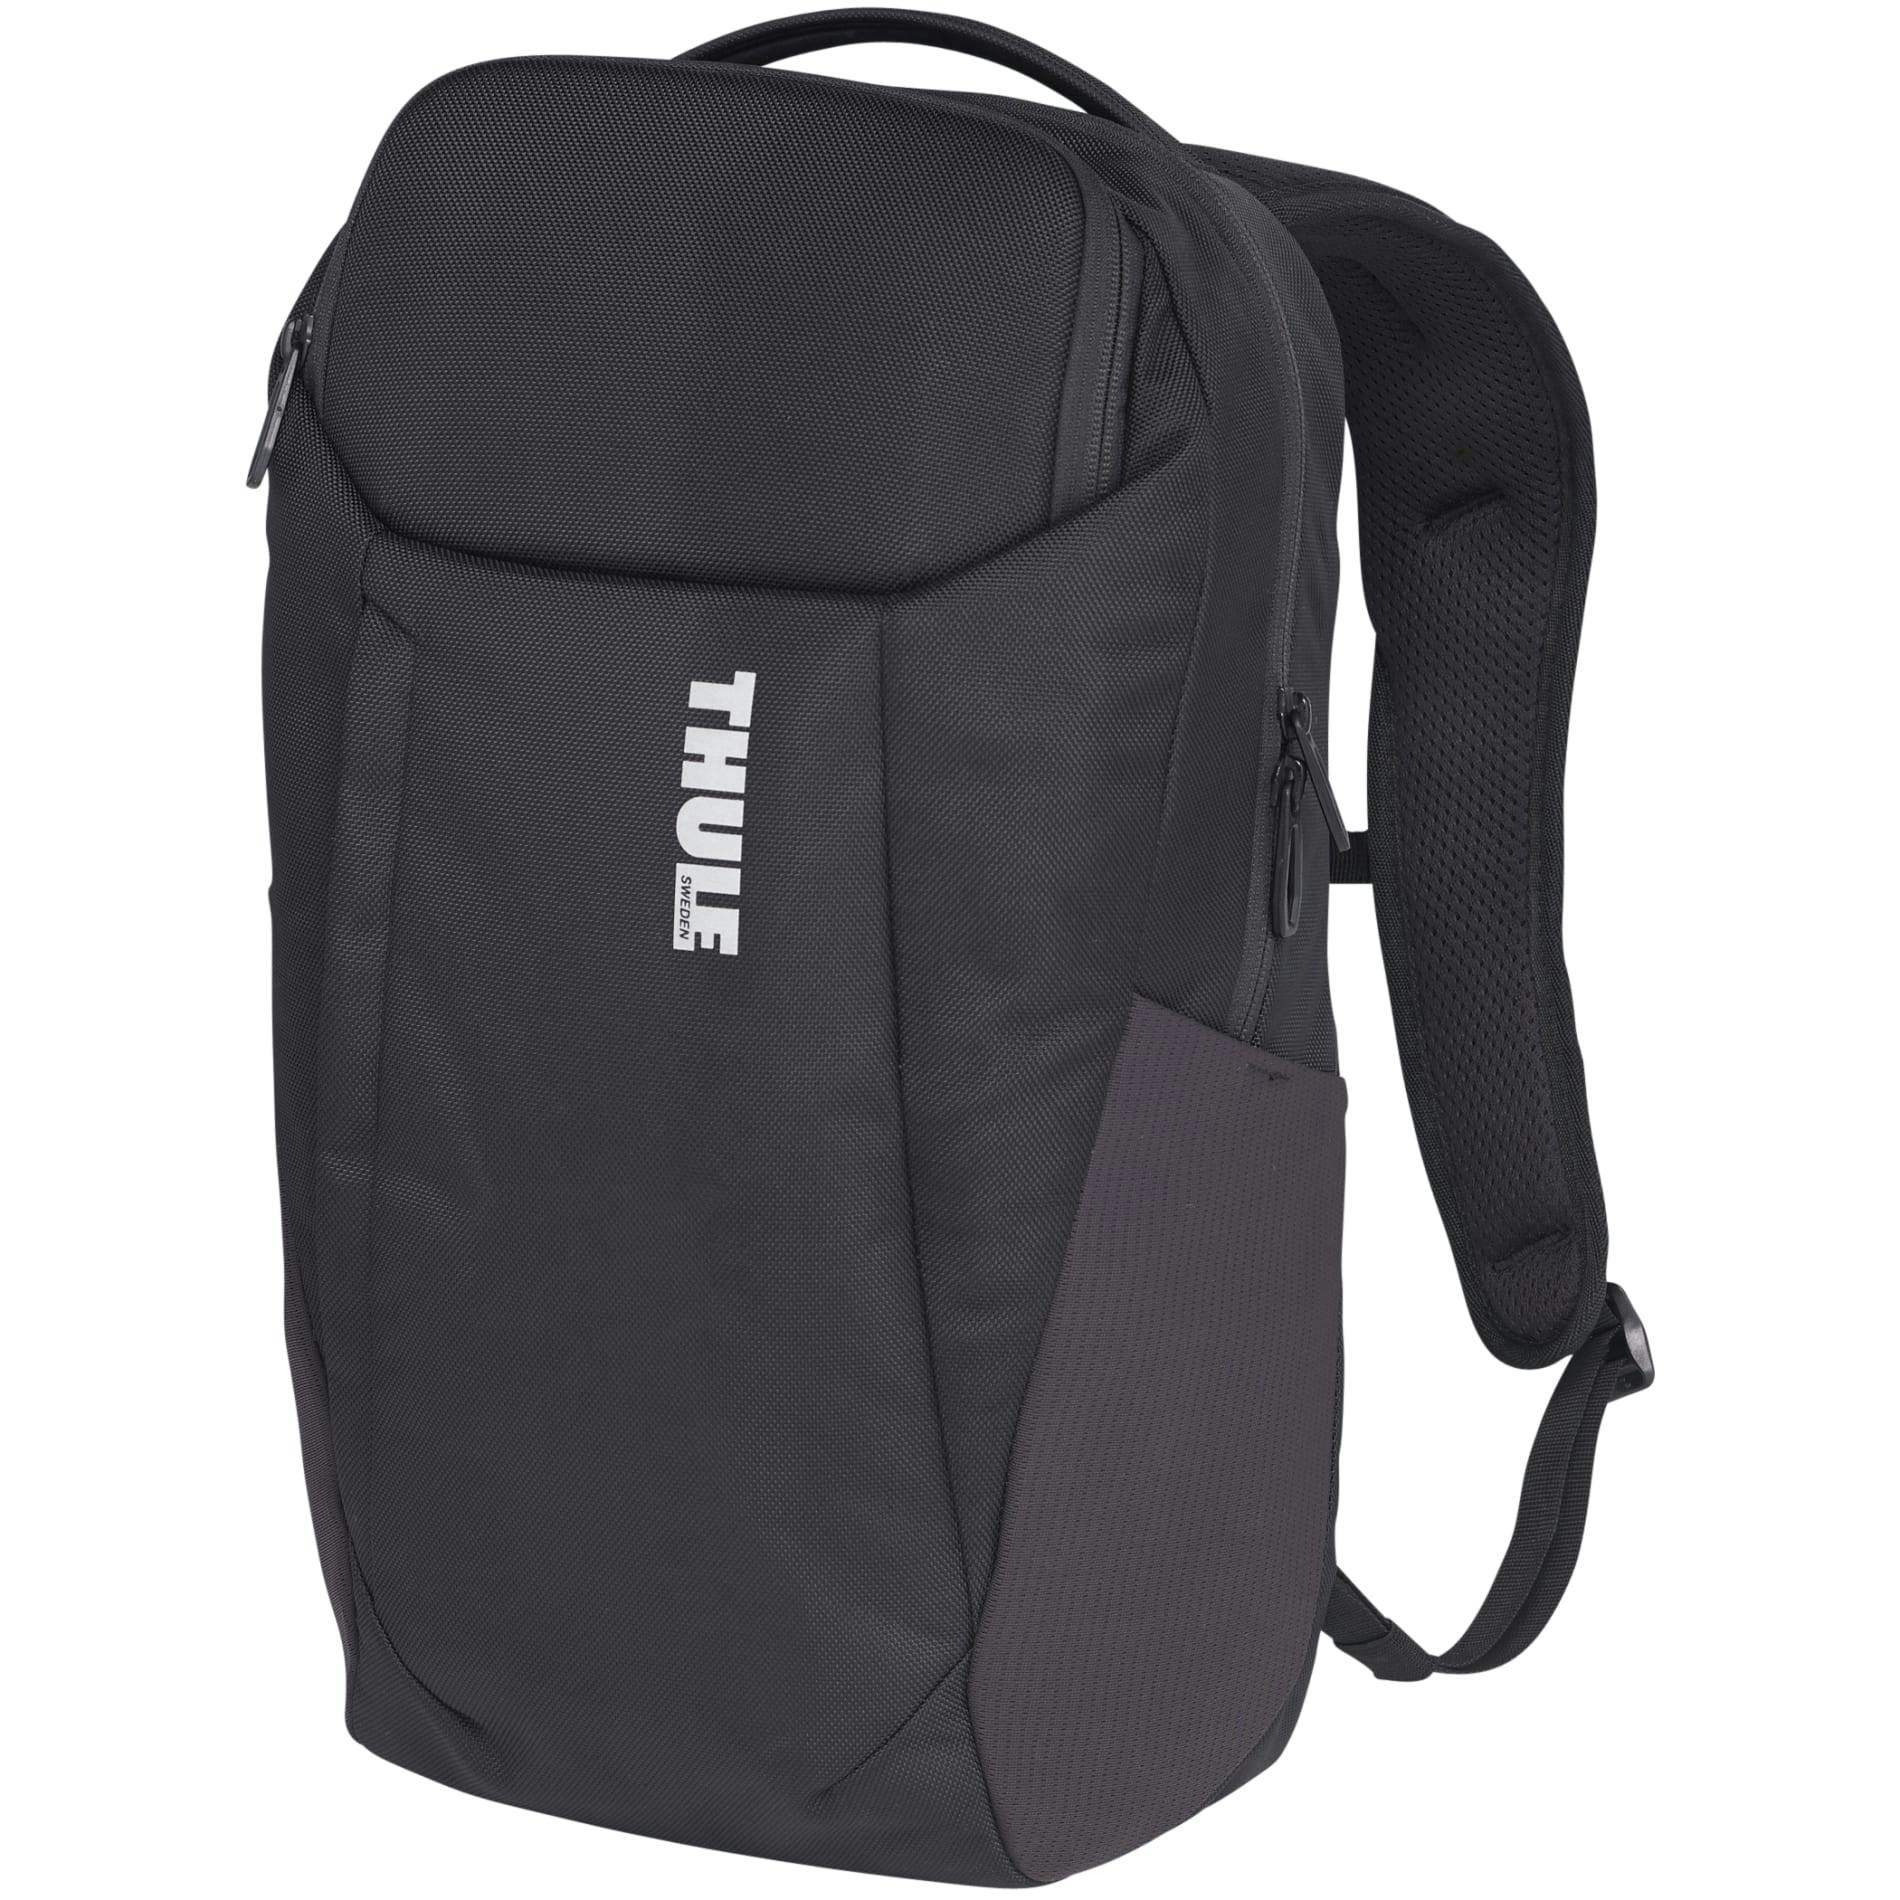 Thule Accent 15" Computer Backpack 20L - additional Image 1